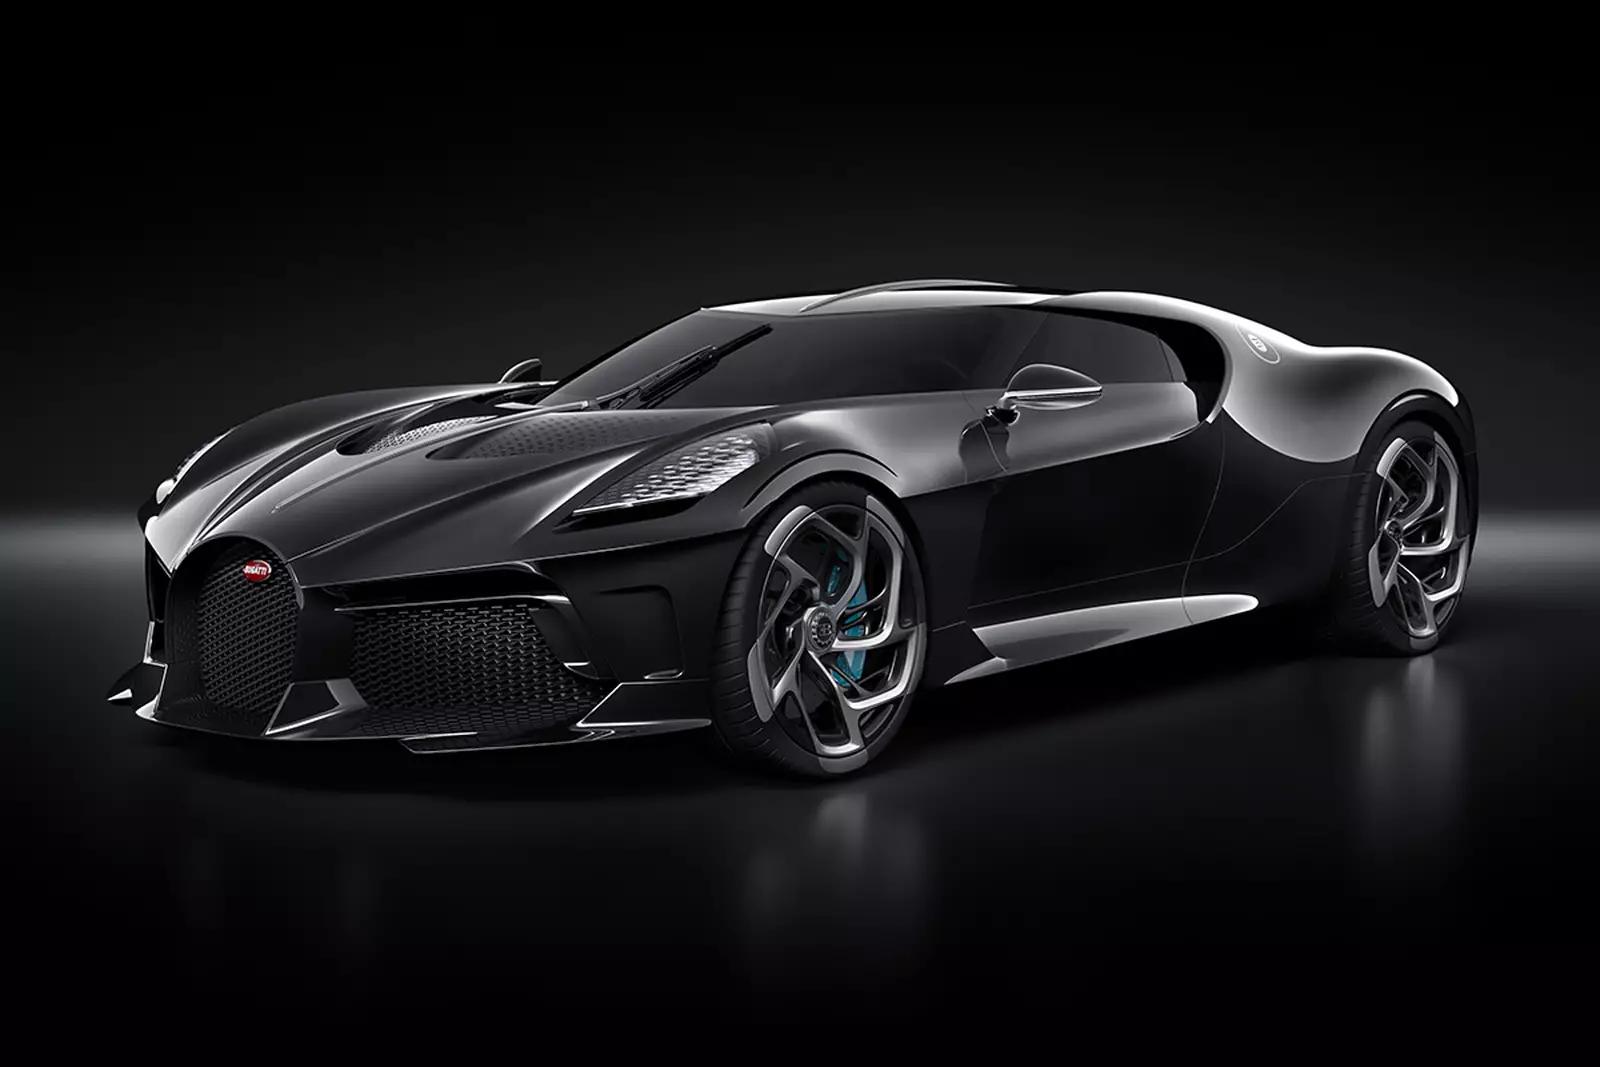 Bugatti luxury car : Everything you need to know